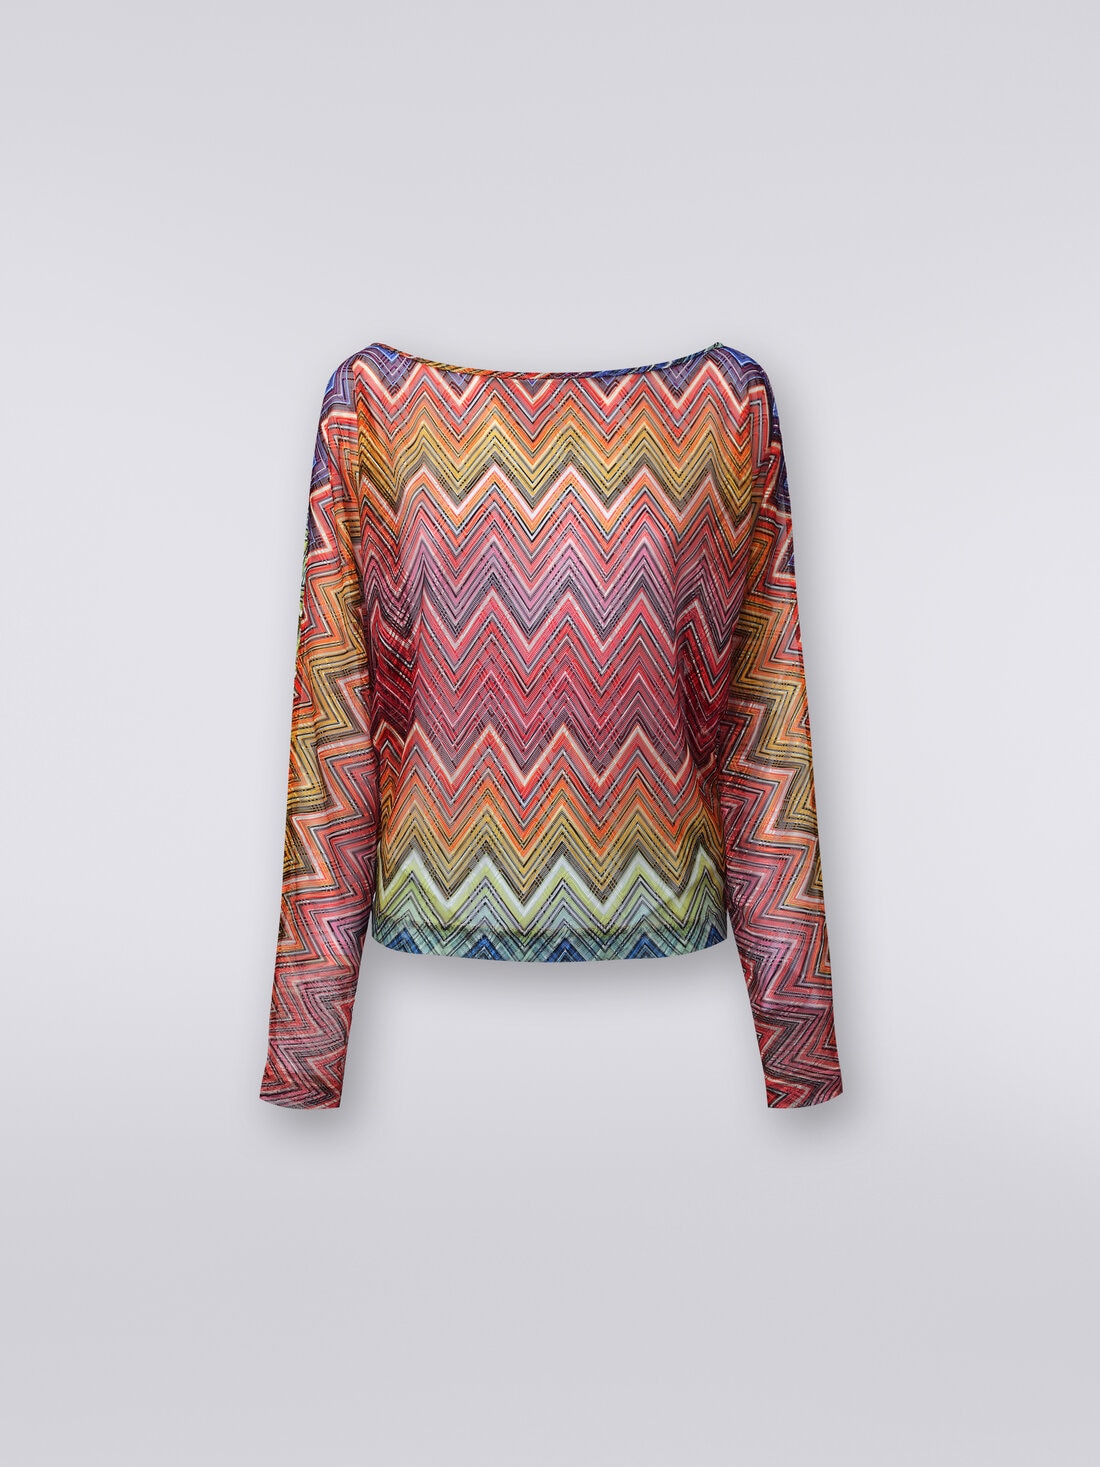 Long-sleeved blouse in zigzag print fabric, Multicoloured  - MS24SK08BR00THS4157 - 0